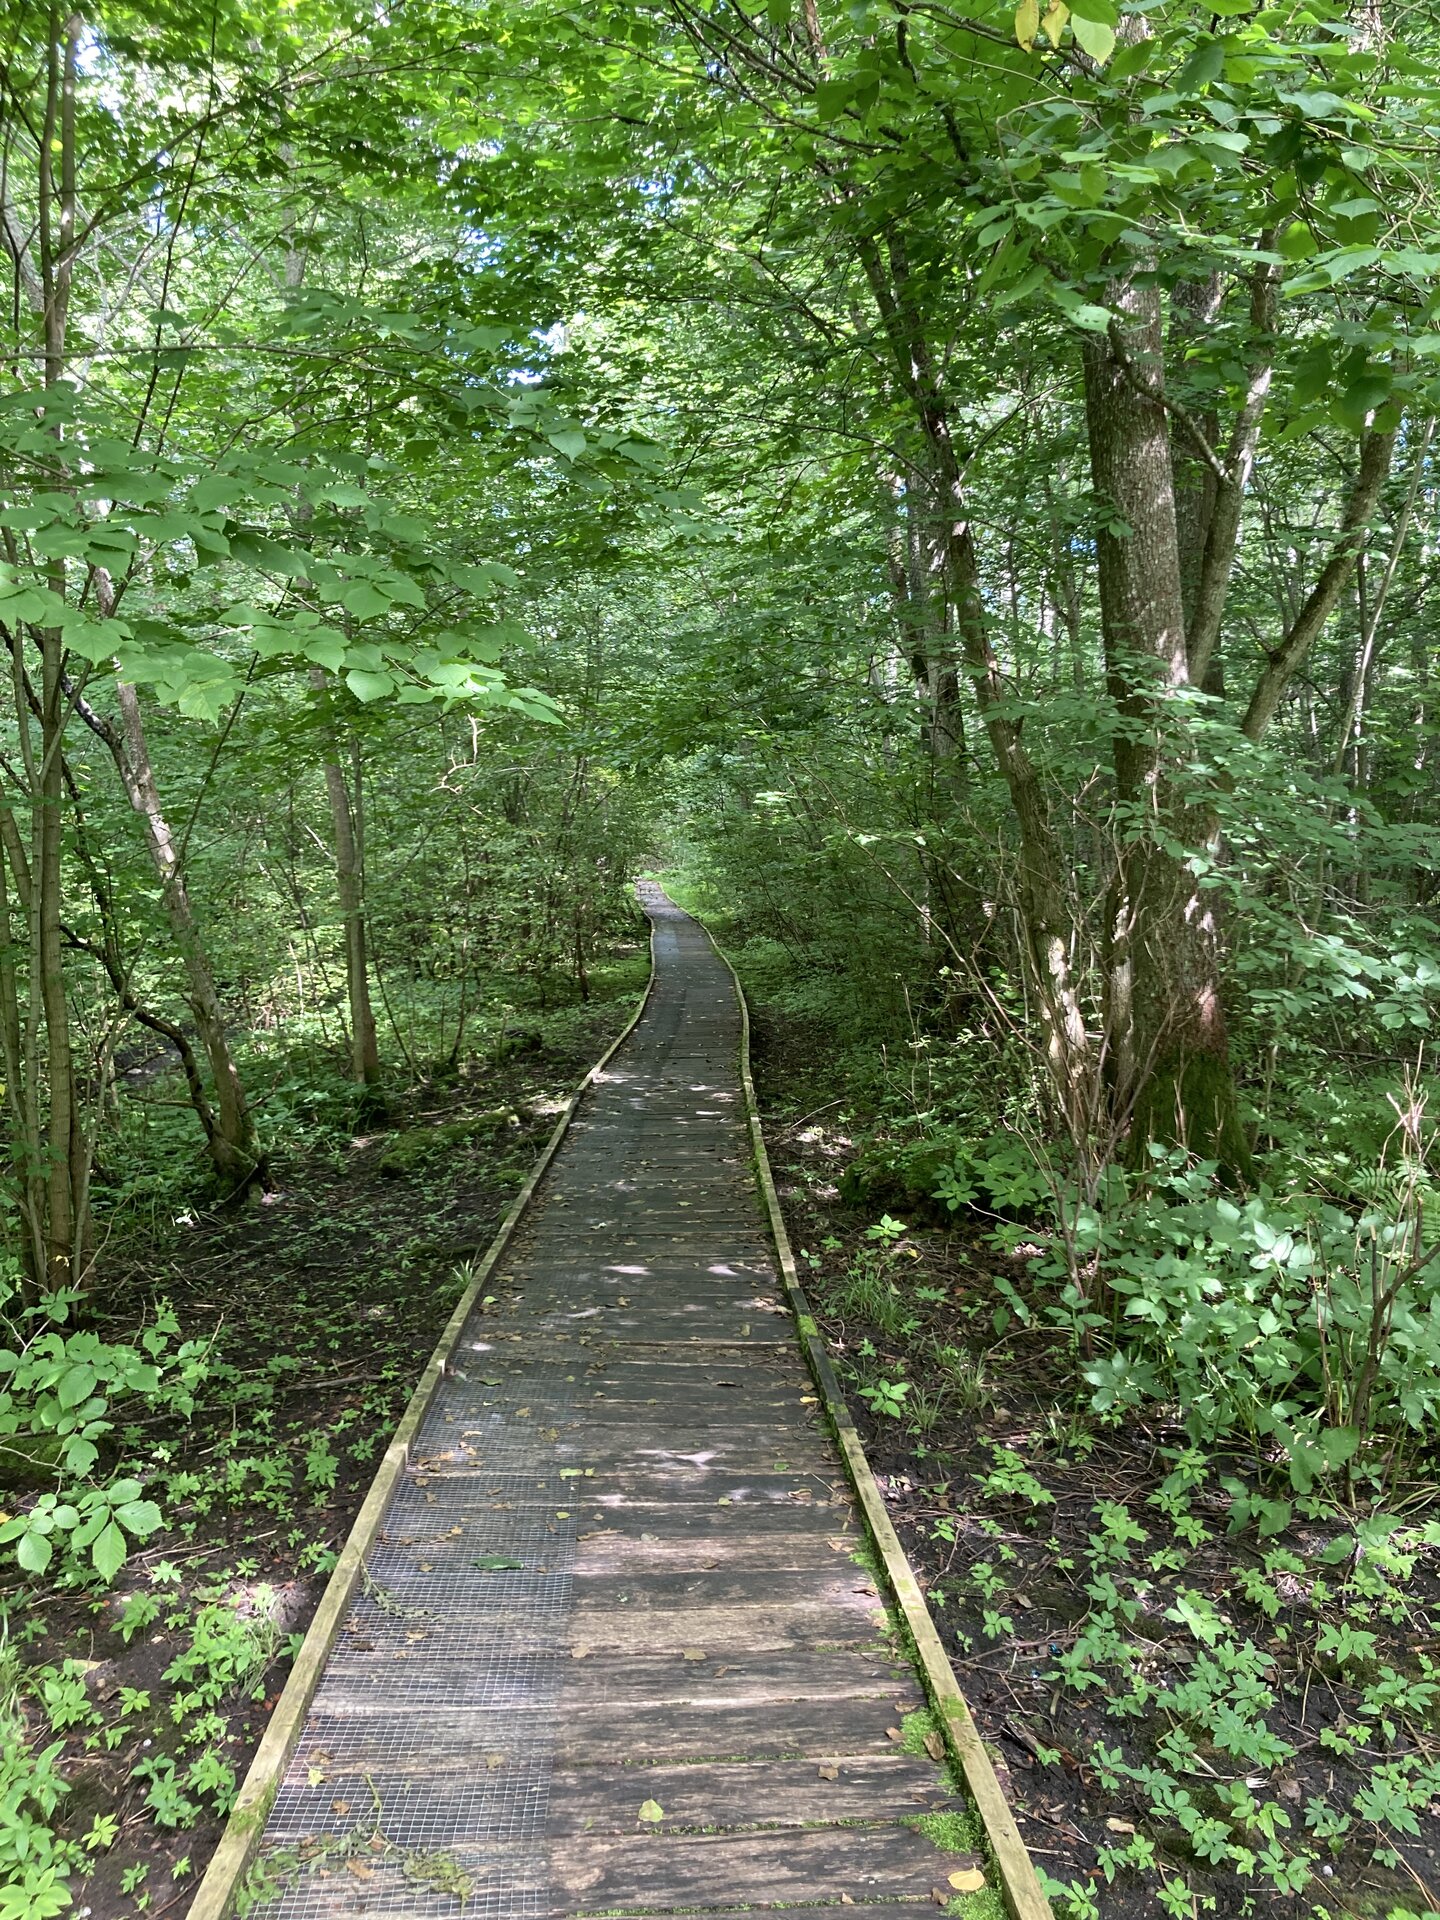 The boardwalk of the hiking trail on the picture